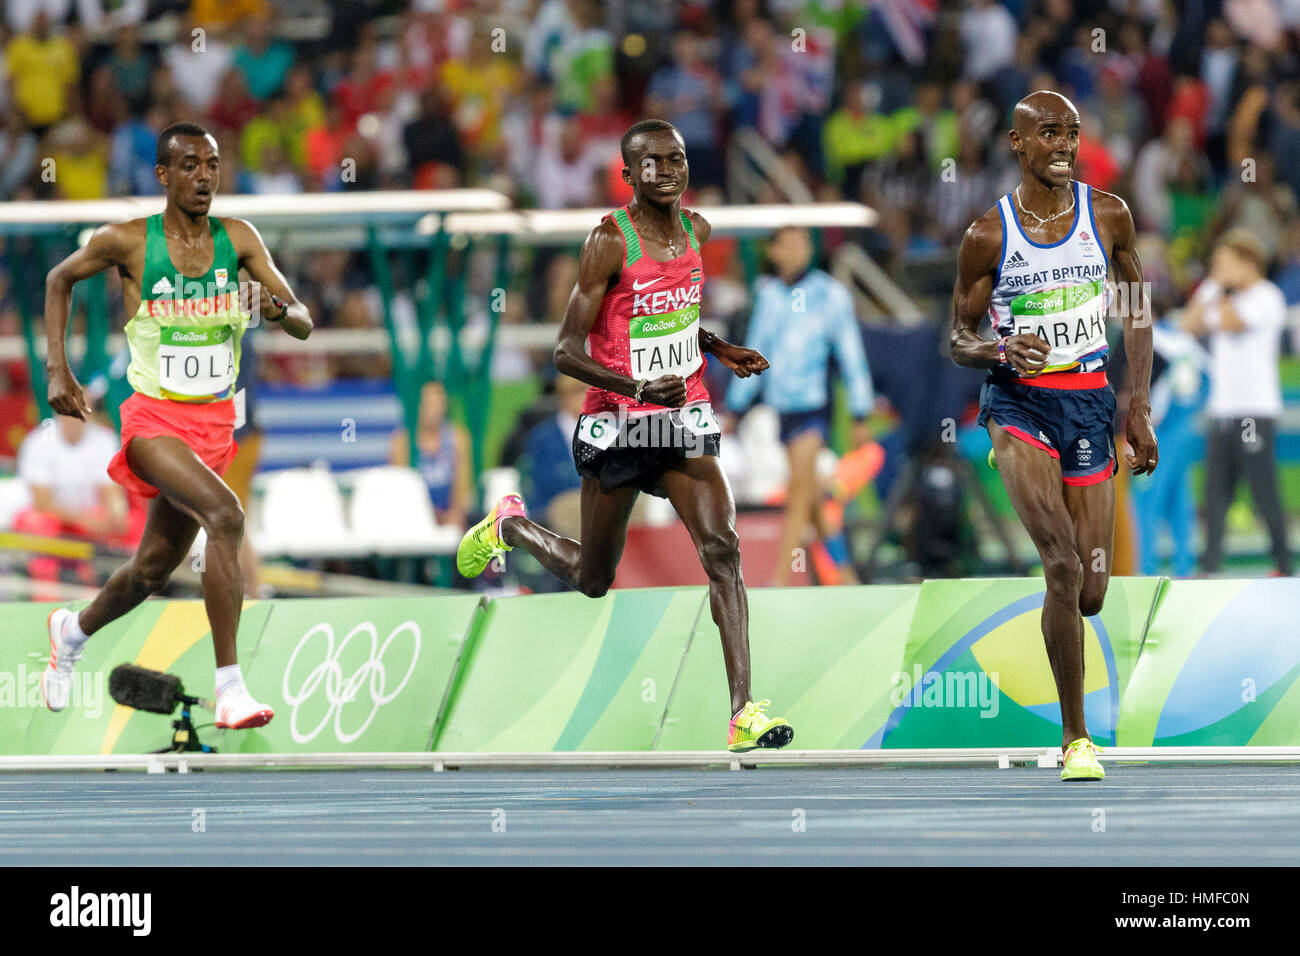 Rio de Janeiro, Brazil. 13 August 2016. Mo Farah (GBR) wins the gold medal in the Men's 10,000m at the 2016 Olympic Summer Games. ©Paul J. Sutton/PCN Stock Photo